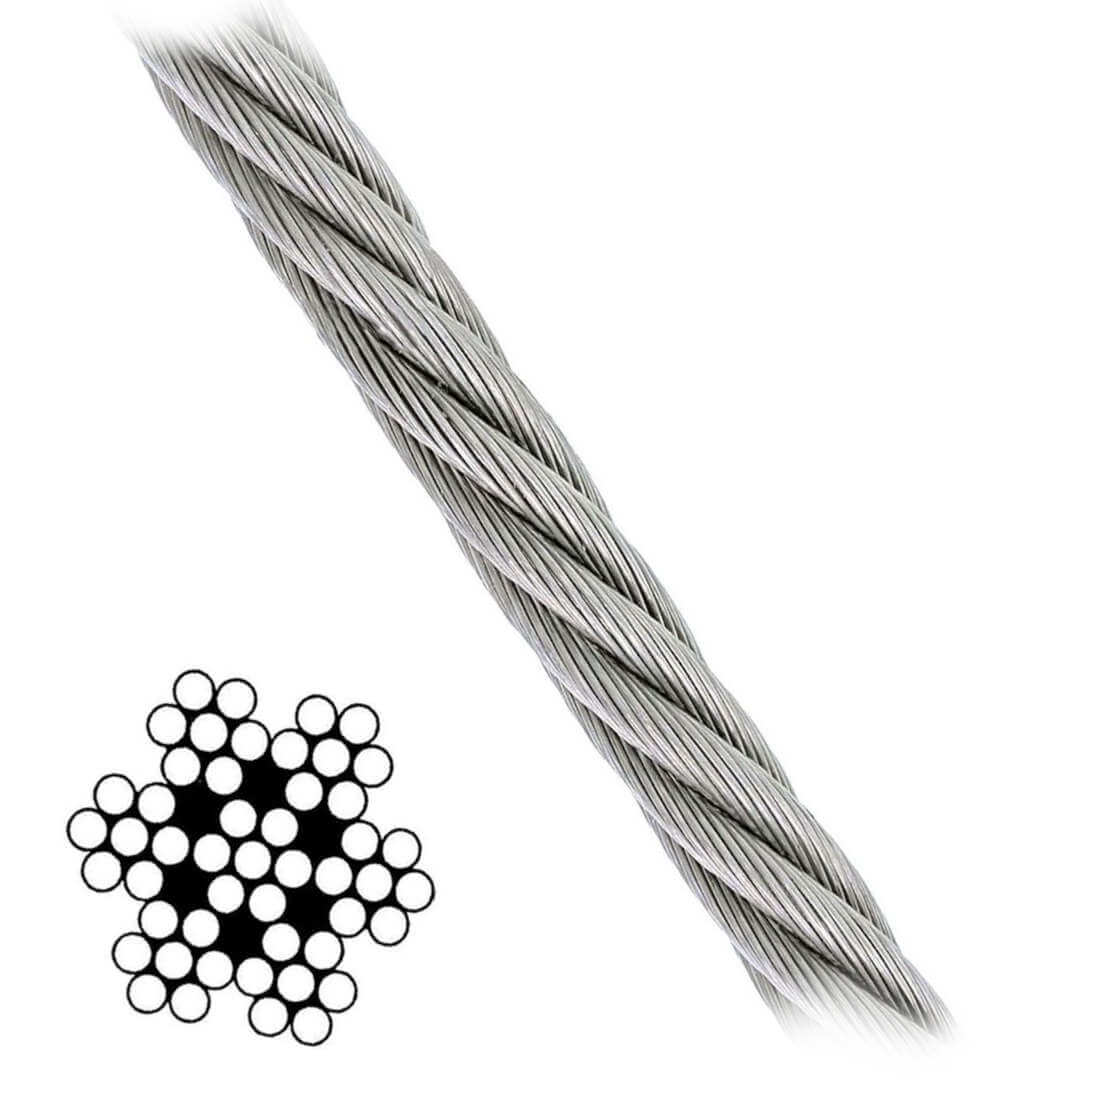  7x7 Galvanized Aircraft Cable - general purpose wire rope